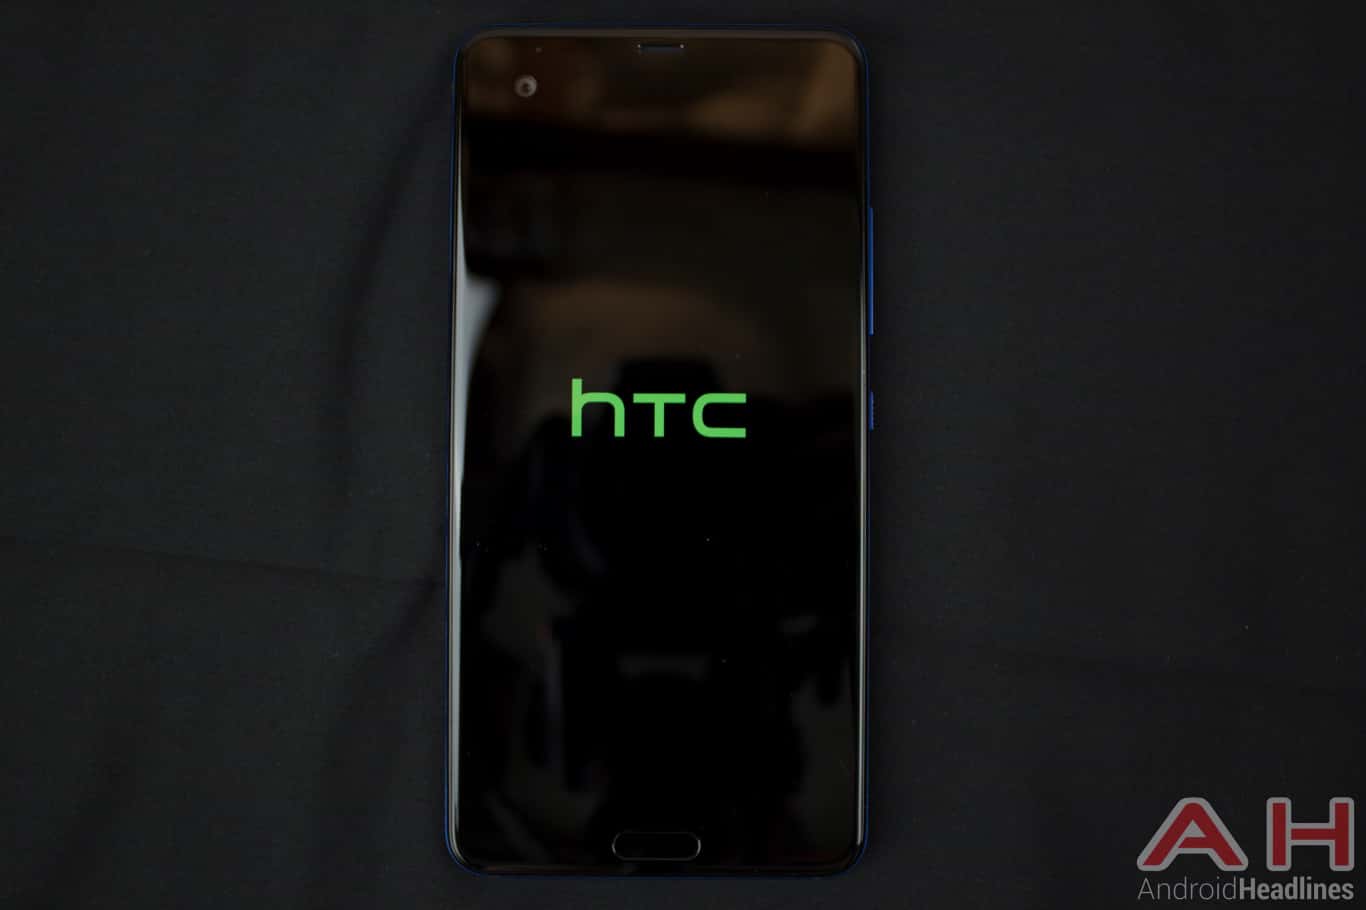 HTC is skipping the new U12 flagship announcement at MWC 2018